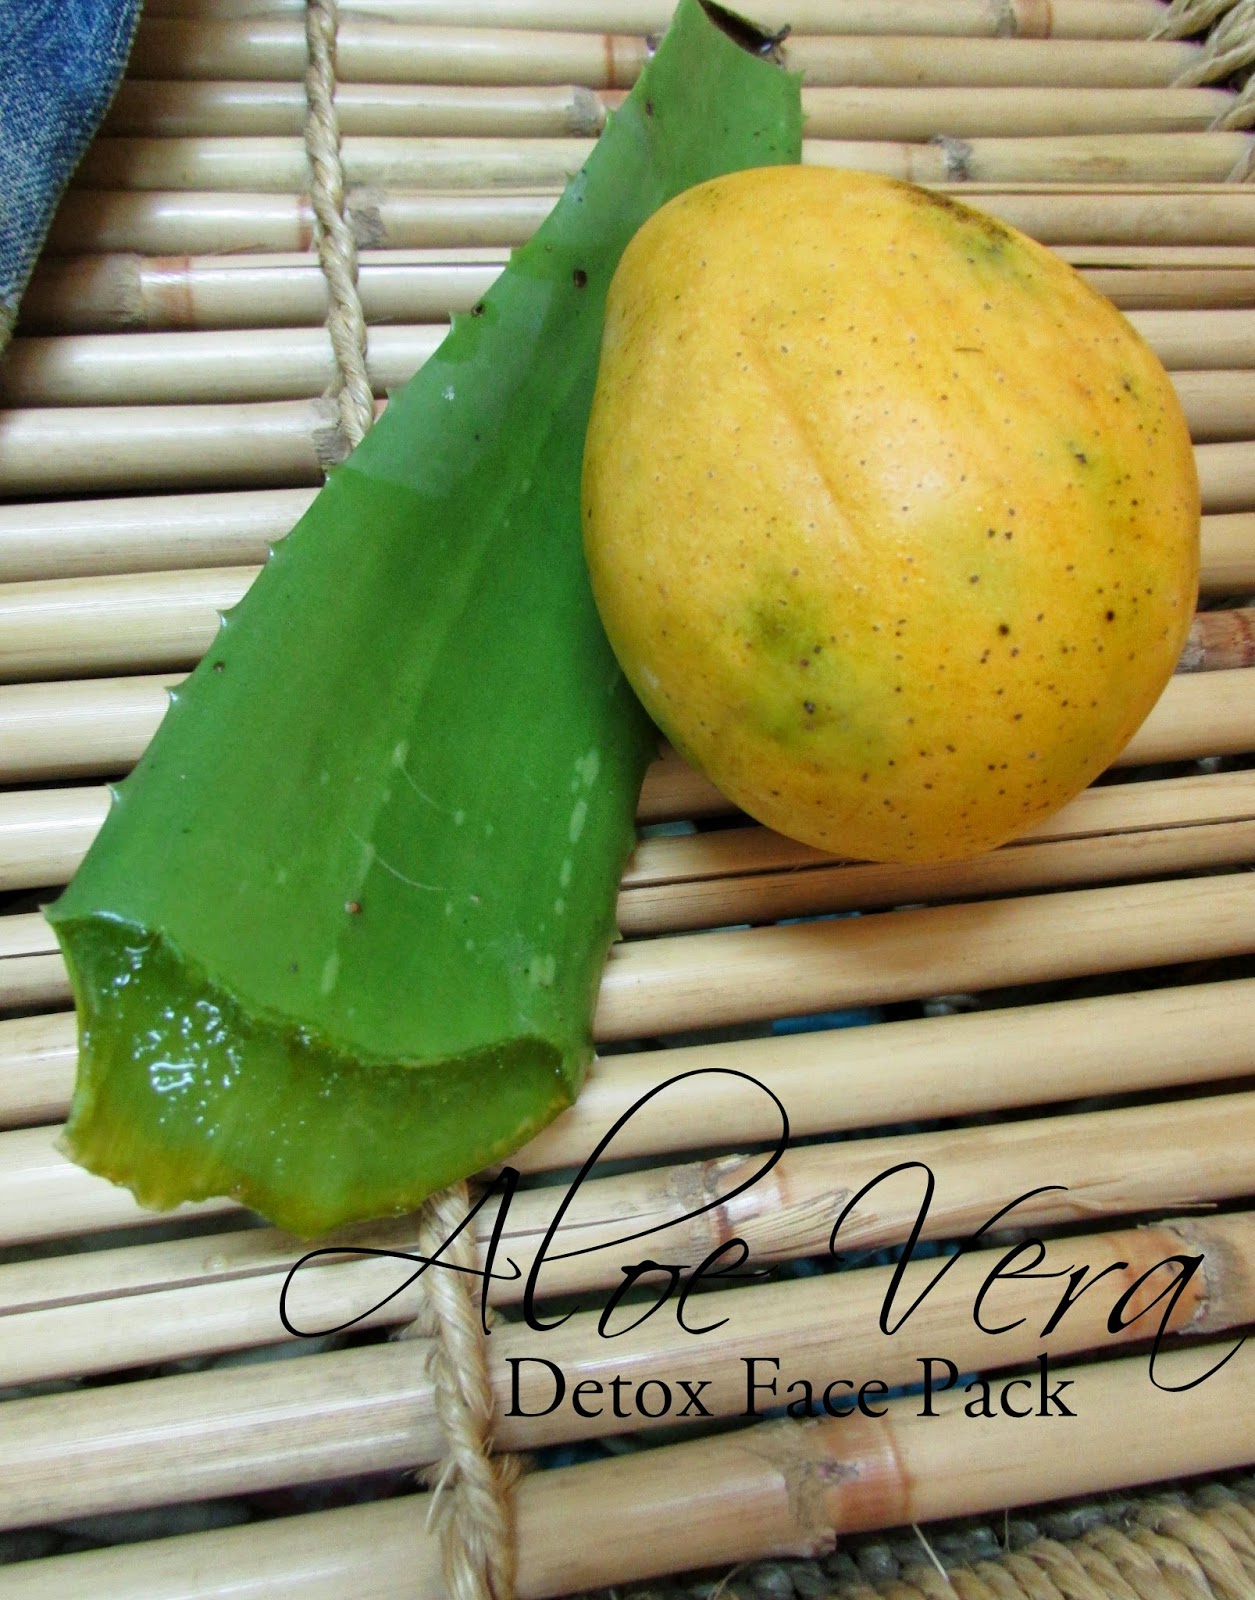 face pack , detoxx face pack , aloe vera face pack , aloe pack , aloe vera for skin , how to make aloe vera gel , hoe to make aloe vera face pack at home,Foot soak , feet soak , feet pedicure, pedicure, relaxing pedicure, stress free pedicure, DIY Foot soak , DIY feet soak , DIY feet pedicure, DIY pedicure, DIY relaxing pedicure, DIY stress free pedicure, Home made Foot soak , Home made feet soak , Home made feet pedicure, Home made pedicure, Home made relaxing pedicure, Home made stress free pedicure, Home remedies for stress, home remedies for foot Oder , home remedies to relieve stress, home remedies for cold, home remedies for fever, home remedies for summer , home remedies to sleep well, home remedies for clean feet, home remedies for pain, home remedies for energy , home remedies for fatigue , home remedies for detoxification , home remedies for body detoxification , home remedies for foot detoxification ,Detoxification, detox, how to detox at home, at home ways to detox, DIY foot sole for detoxification , DIY detoxification, How to get rid of stress, How to get rid of foot Oder , home remedies to relieve stress, How to get rid of cold, How to get rid of fever, How to get rid of summer ,  How to get rid of insomnia, How to get rid of dirty feet, How to get rid of pain, How to get rid of bad energy , How to get rid of fatigue , How to do detoxification at home , How to do body detoxification , How to do foot detoxification , mustard , mustard seeds, how to use mustard seeds, uses of mustard seed, how to use mustard seeds for pain, how to use mustard seeds for body pain, how to use mustard seeds for foot pain, how to use mustard seeds for foot Oder, how to use mustard seeds for joint pain, how to use mustard seeds for detox, how to use mustard seeds for detoxification , how to use mustard seeds for stress, how to use mustard seeds for fatigue, how to use mustard seeds for insomnia , how to use mustard seeds for cold, how to use mustard seeds for fever , how to use mustard seeds for foot soak, how to use mustard seeds for foot bath, how to use mustard seeds for bath, DIY mustard foot soak, DIY mustard soak, DIY mustard bath, DIY mustard foot bath, DIY mustard detox bath, DIY mustard detox foot bath, DIY mustard detoxification , Home made mustard foot soak, Home made mustard soak, Home made mustard bath, Home made mustard foot bath, Home made mustard detox bath, Home made mustard detox foot bath, Home made mustard detoxification , how to get rid of stress , how to relax body, how to get fresh smelling feet, happy feet, stress, fever, cold, fatigue, tiered, nap, insomnia